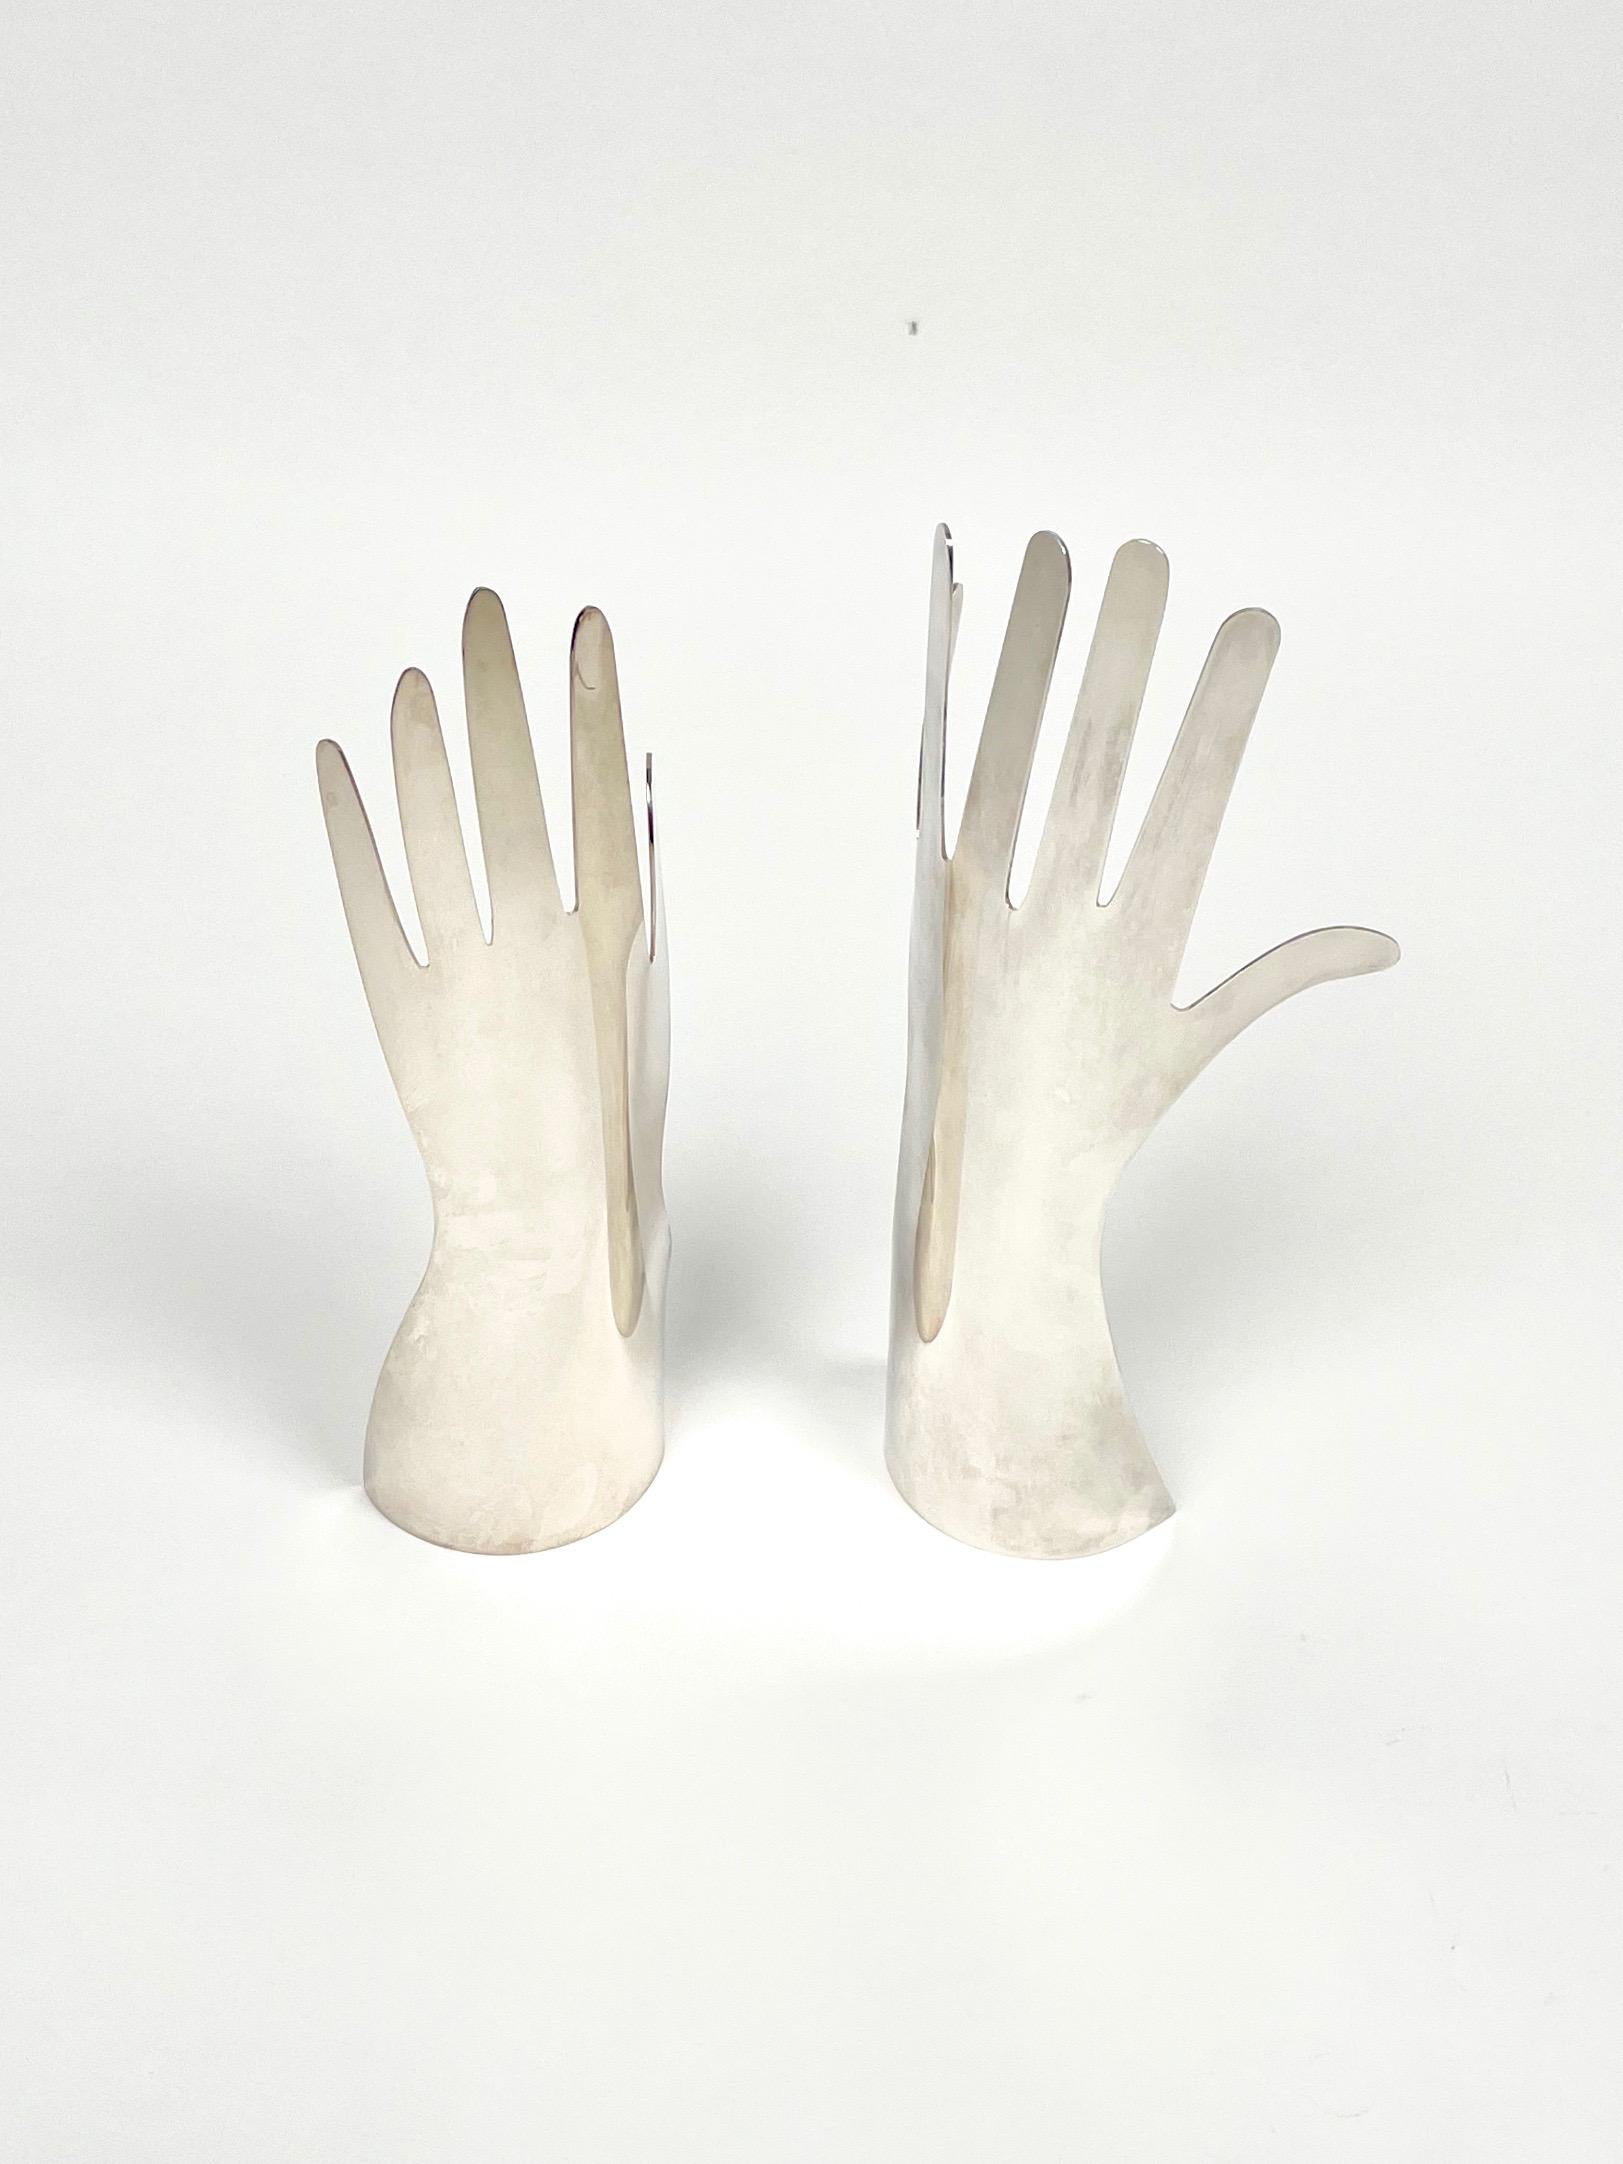 Le Mani or the hands. A silver metal sculpture of two hands designed by Gio Ponti for Sabattini. One hand with 5 the other with 6 fingers. 

Made in Italy in the 1970s.